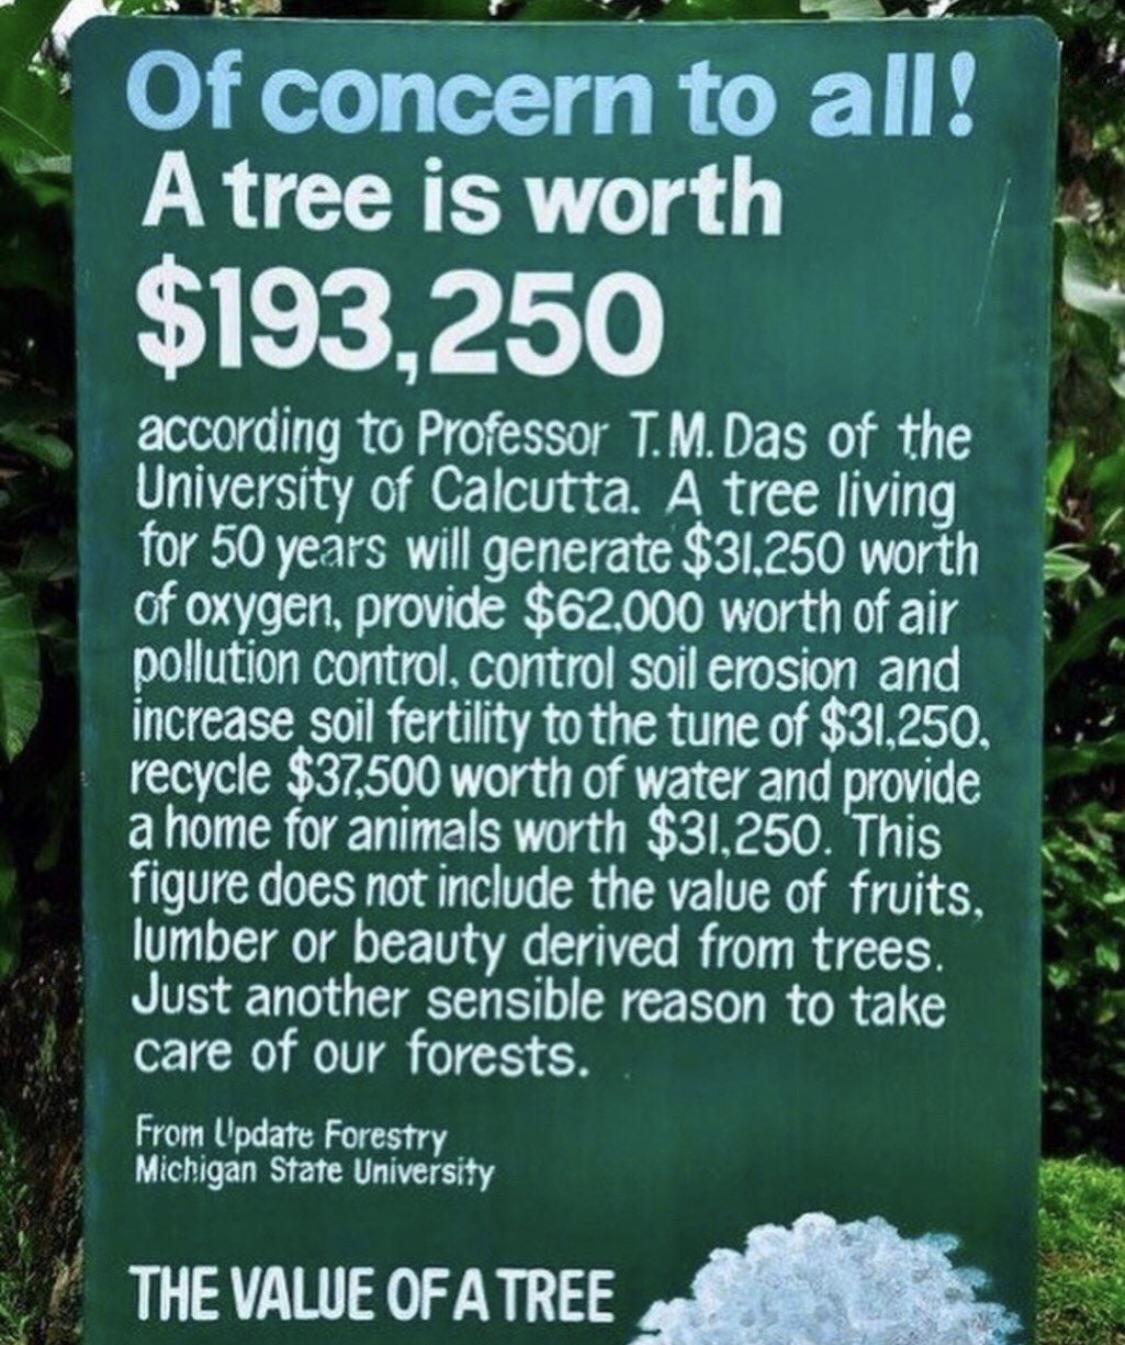 The value of a tree.